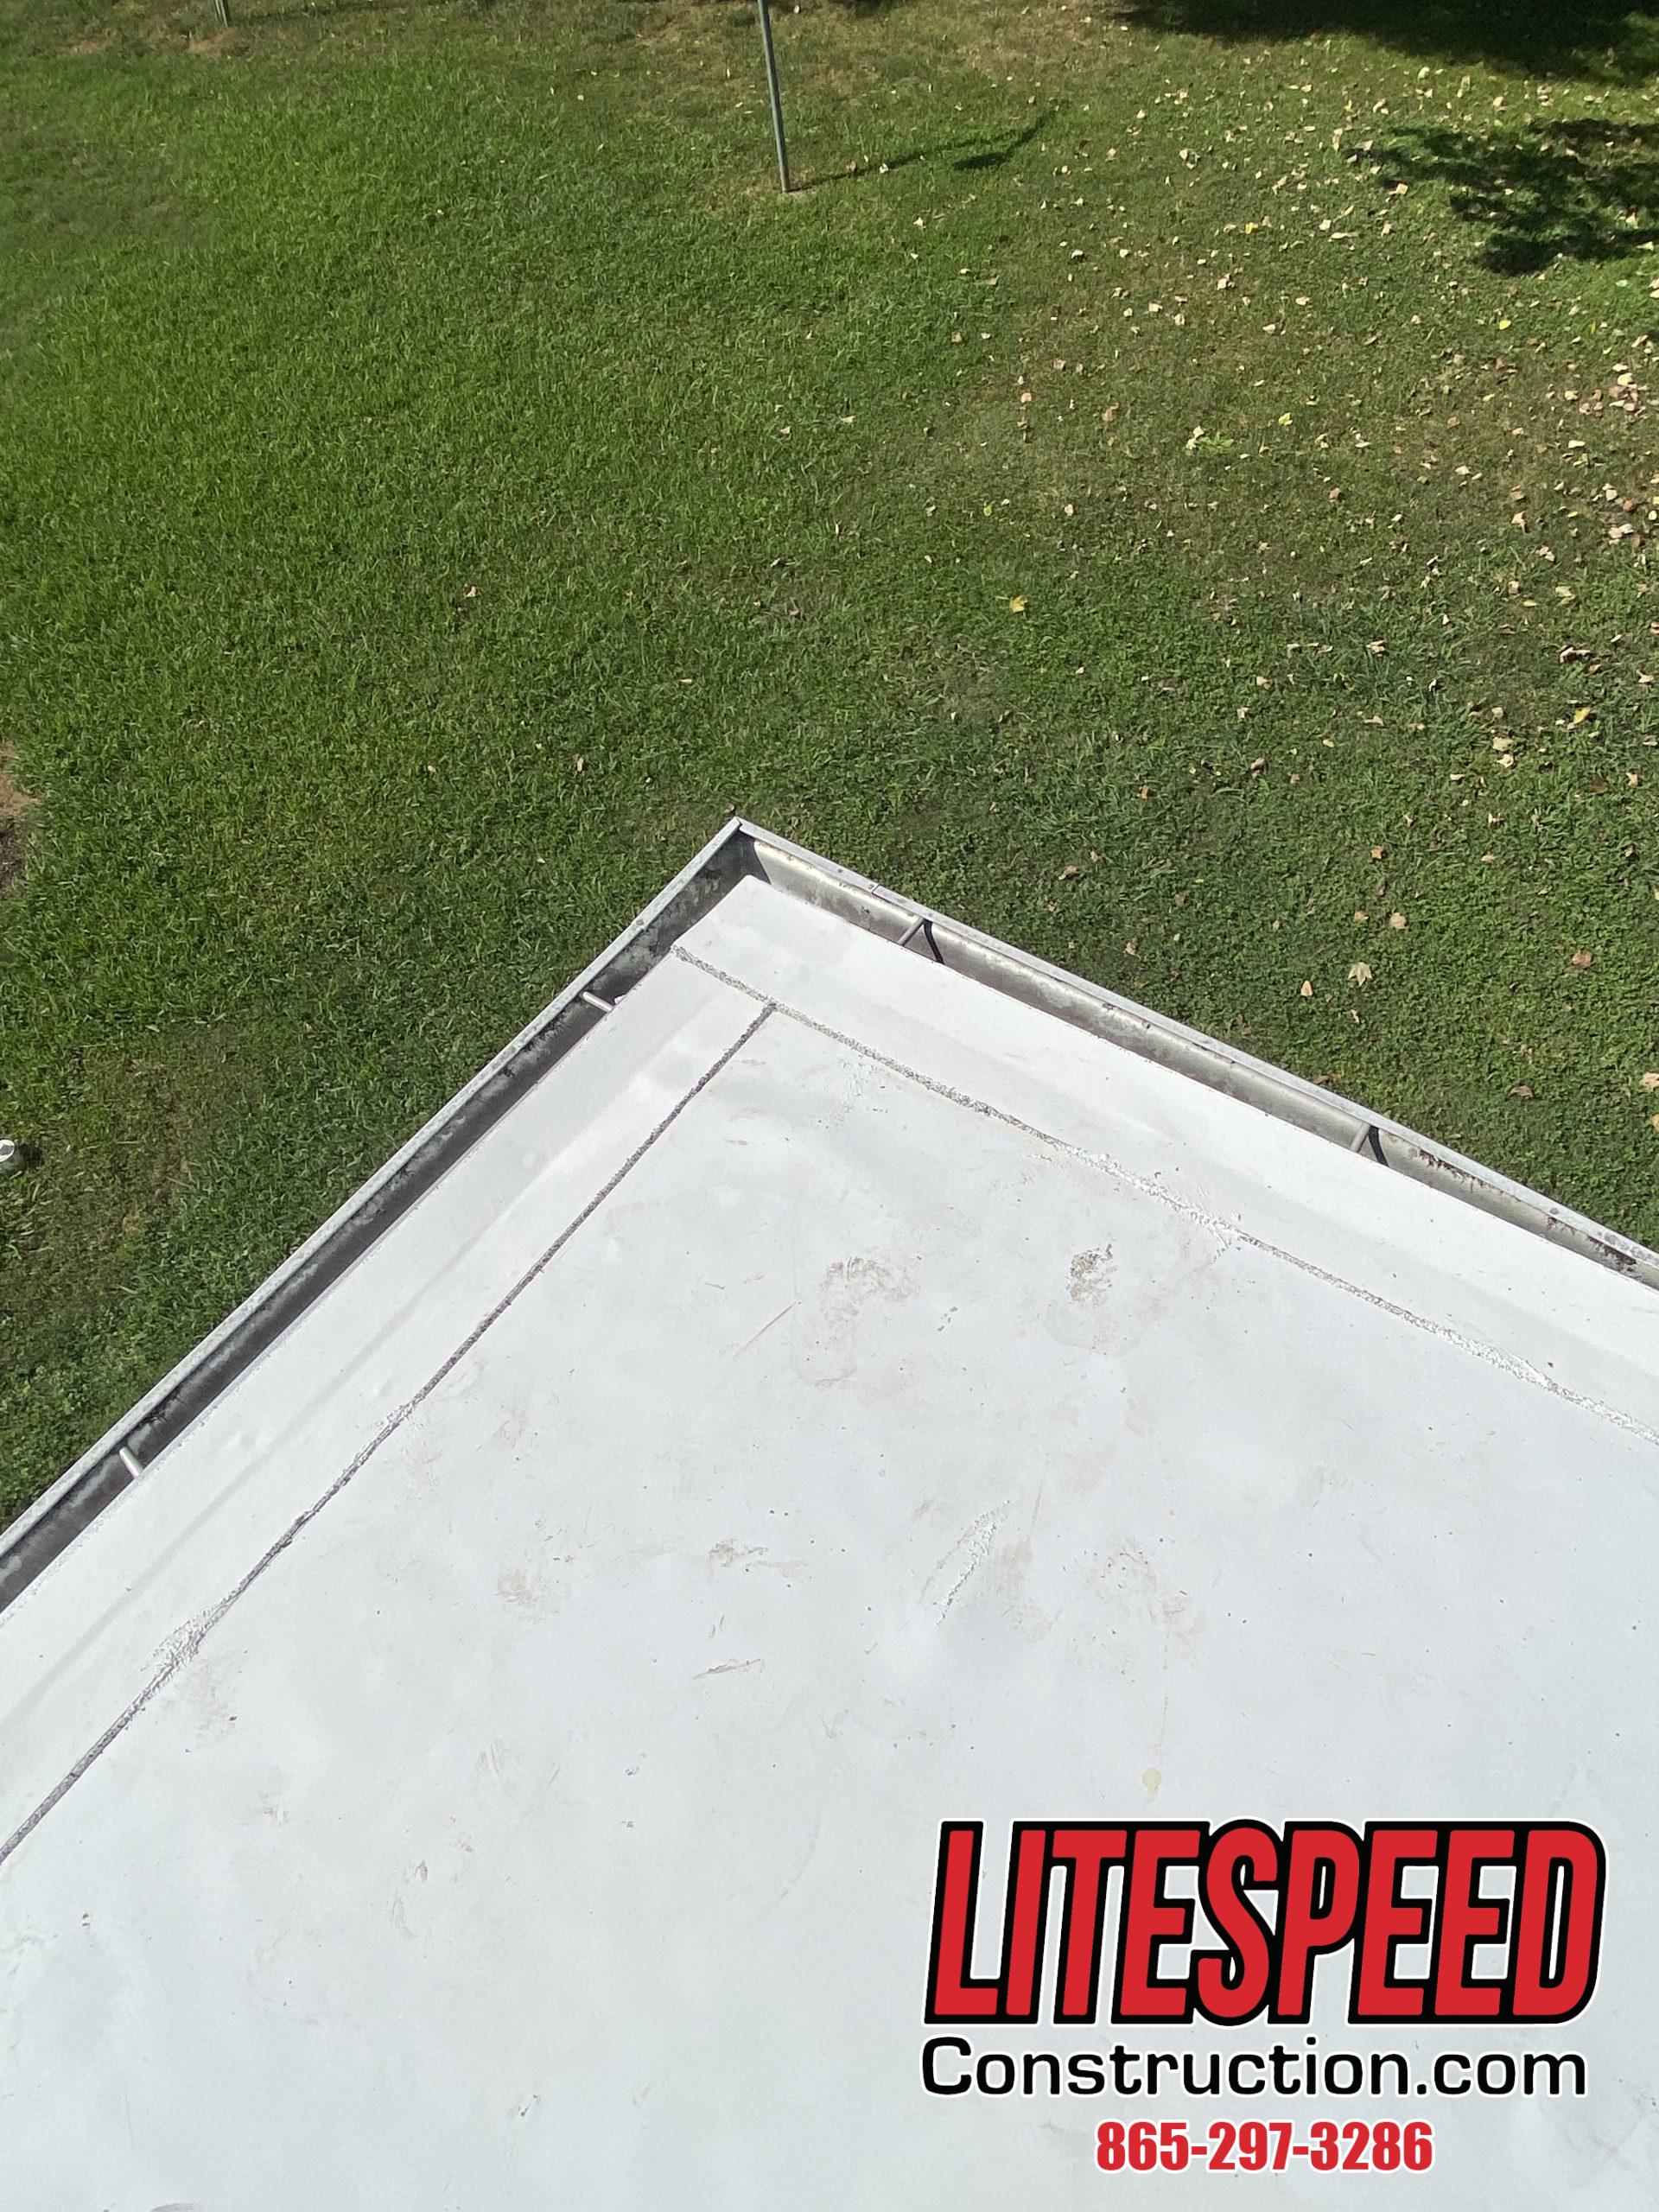 THis is a picture of a corner of a TPO roof